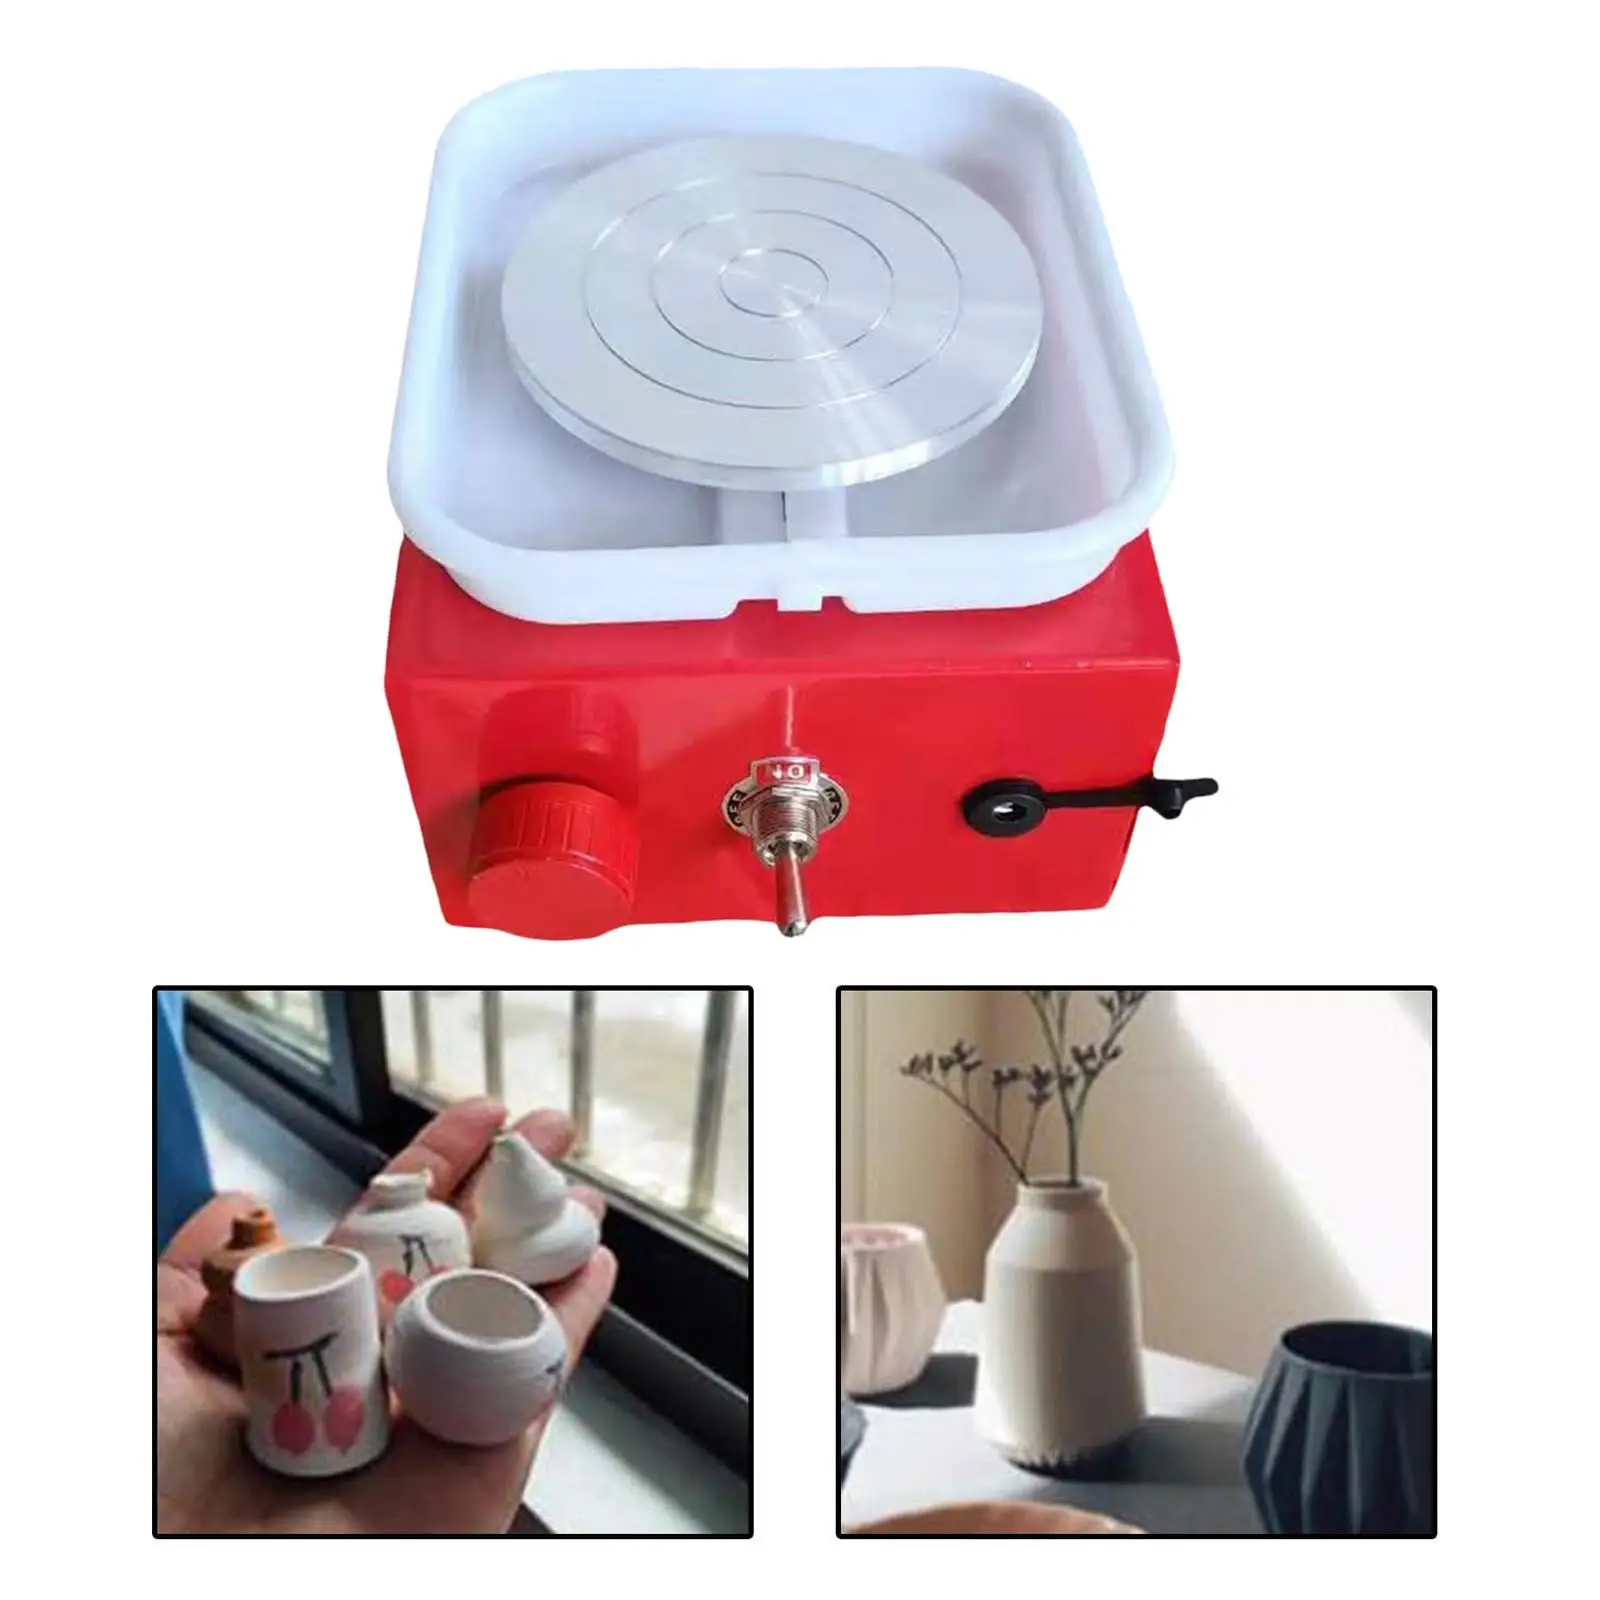 Electric Pottery Wheel Ceramic Turntable Crafts DIY Clay Forming Mini Machine for Kids Adults Home Use Beginner